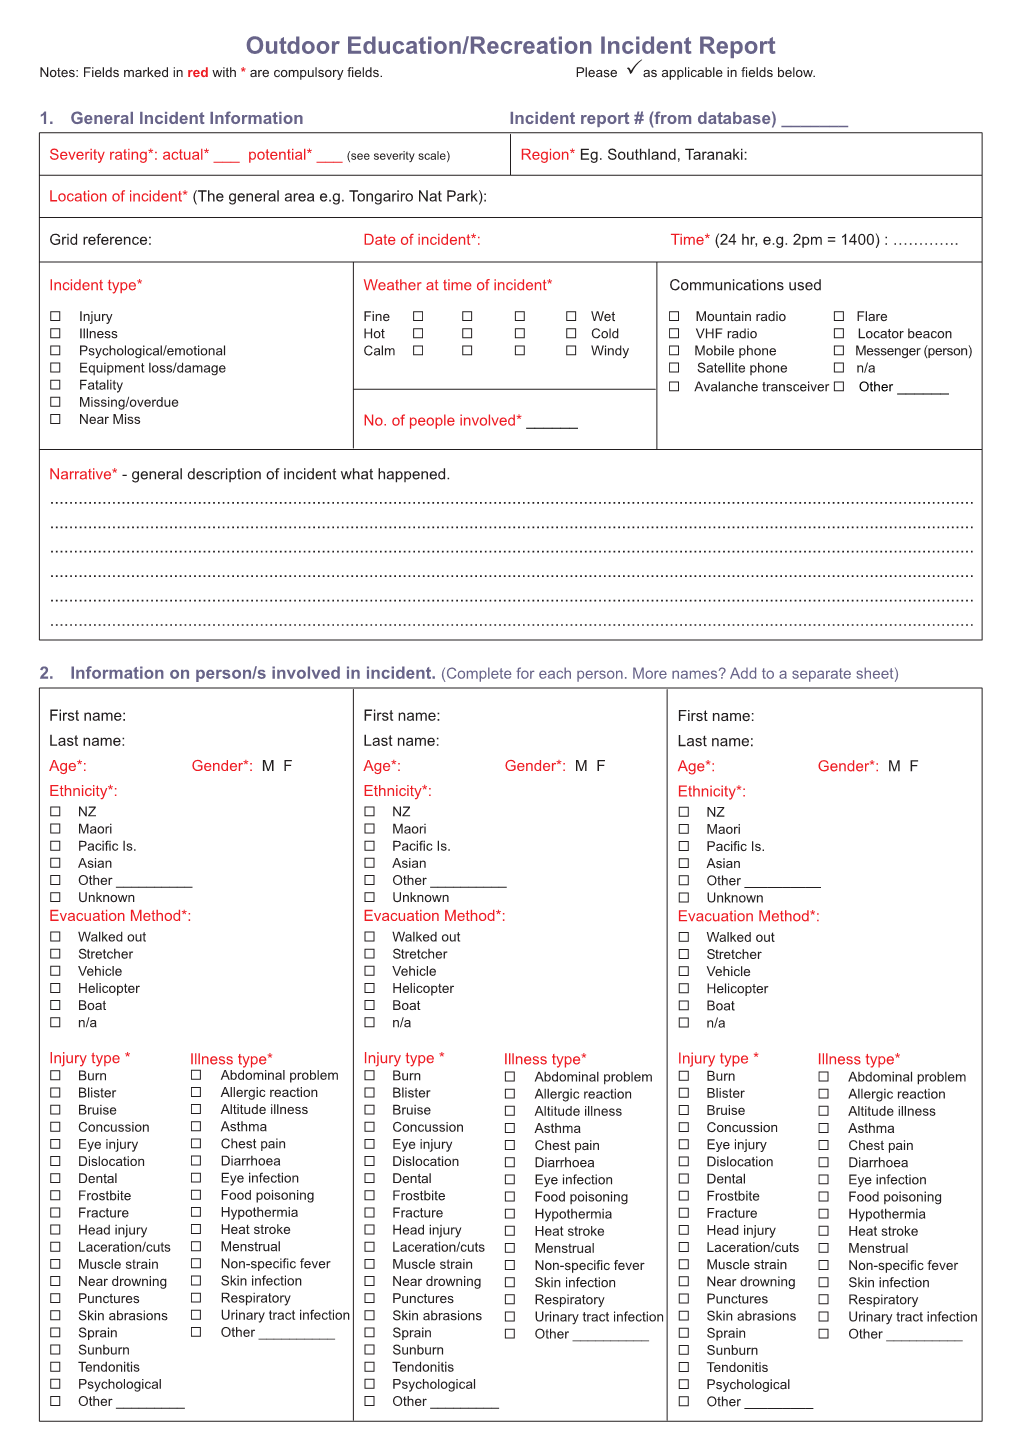 New Zealand 4.5 Outdoor Ed NID Report Form.Pdf